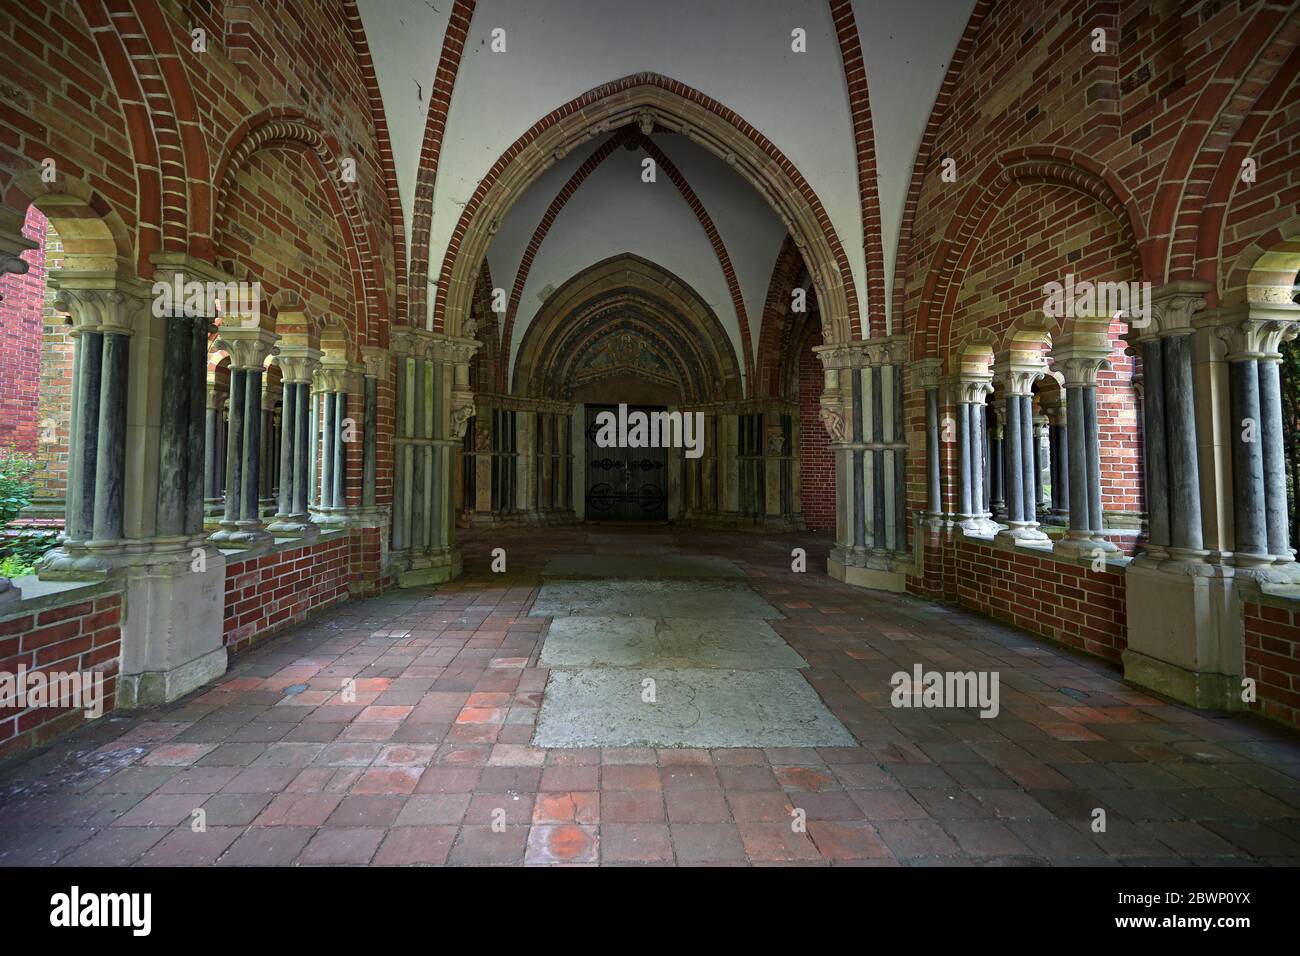 View into the historic narthex called Paradise at the Luebeck Cathedral built as a cloister hall with open arcades in brick architecture, selected foc Stock Photo